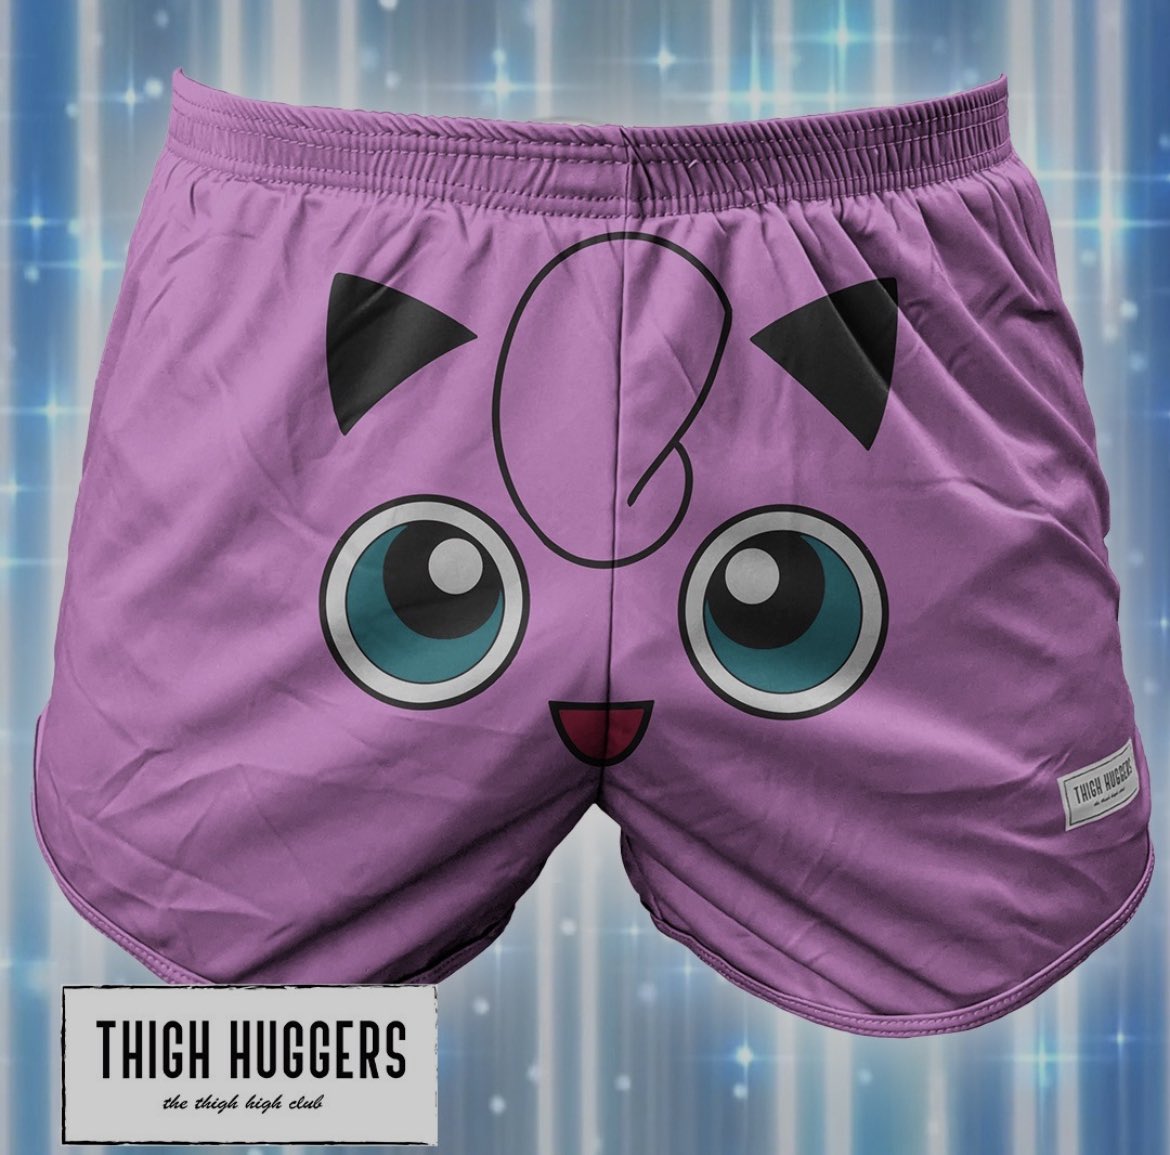 cuttin a hole in these bad boys and pokin my dick out of jigglypuffs mouth and letting my gf go to town on me